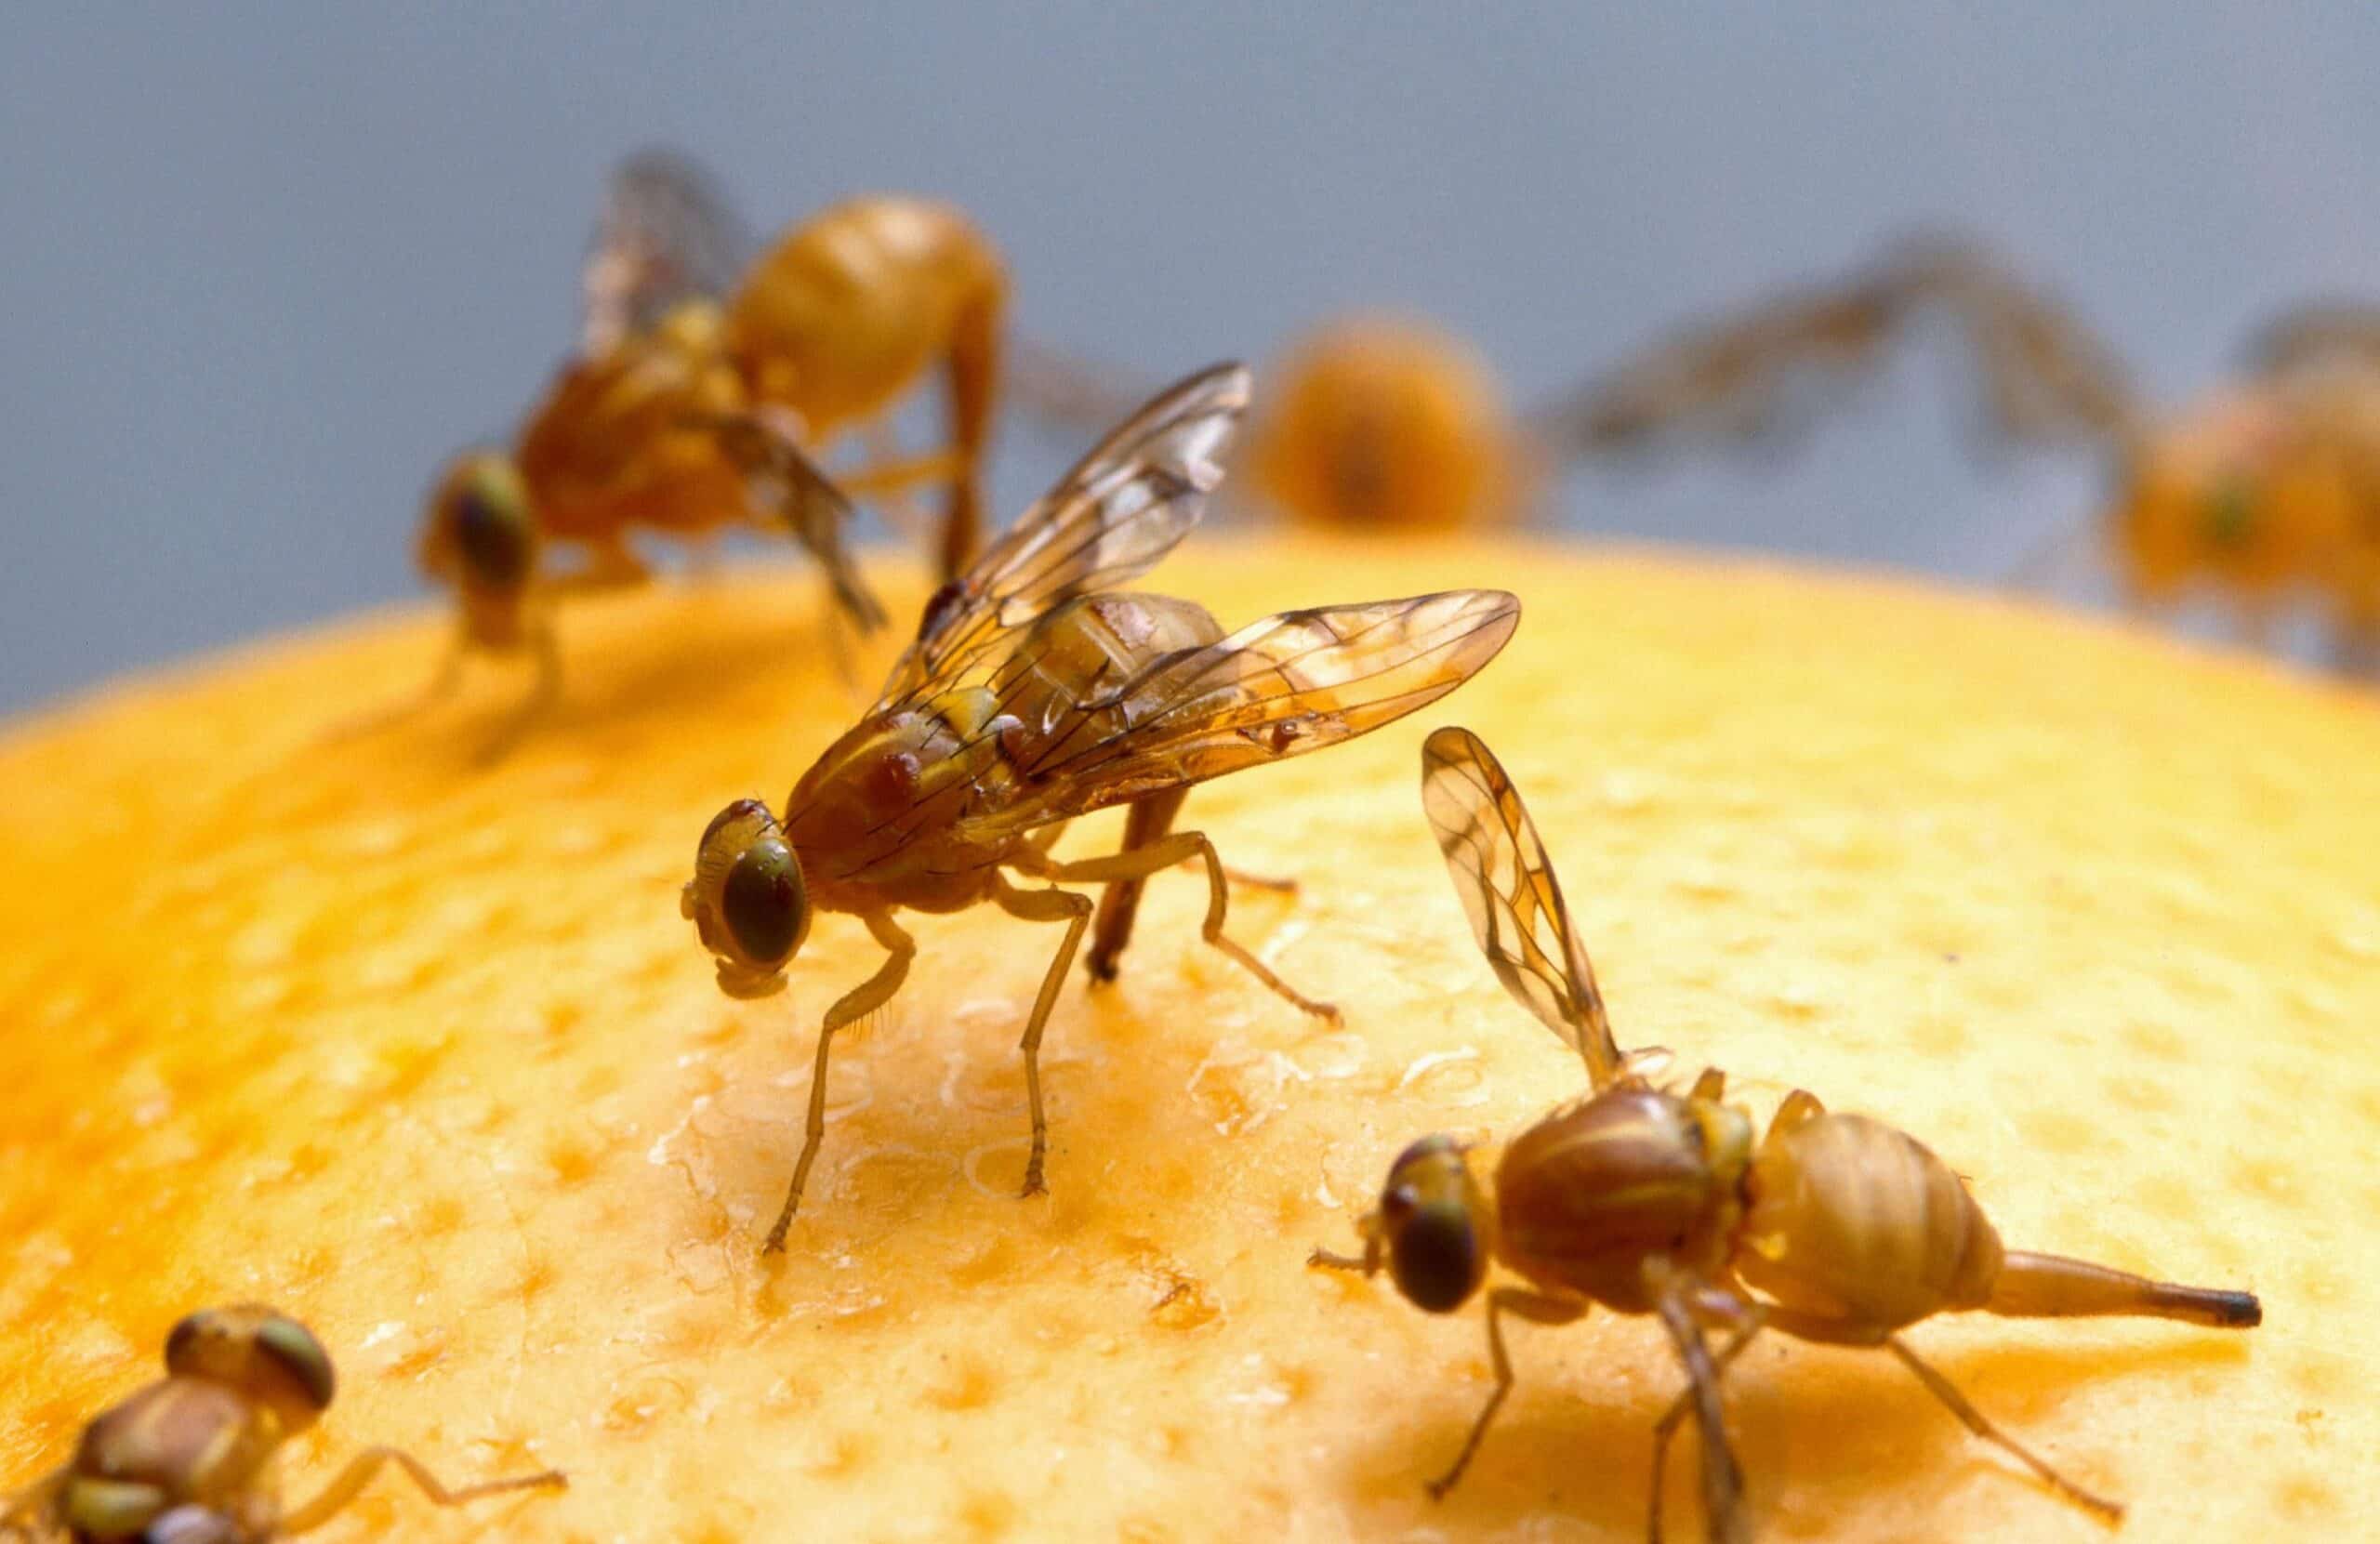 adult fruit fly